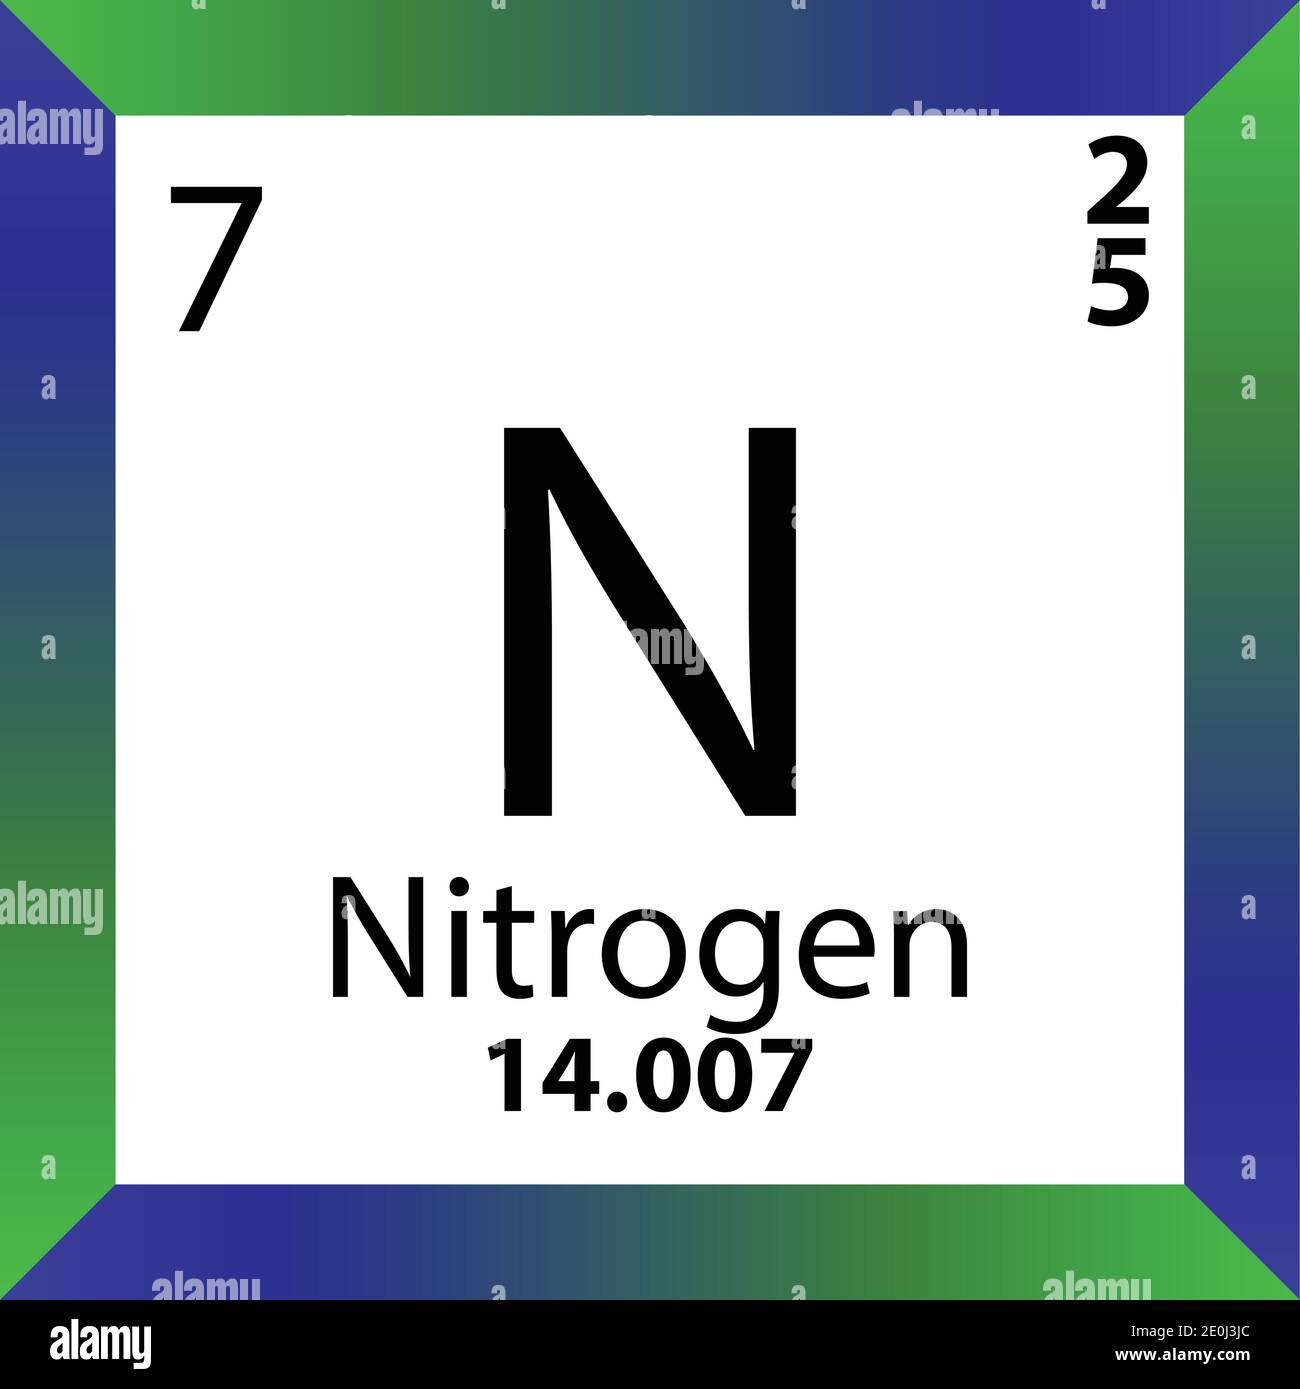 N Nitrogen Chemical Element Periodic Table. Single vector ...